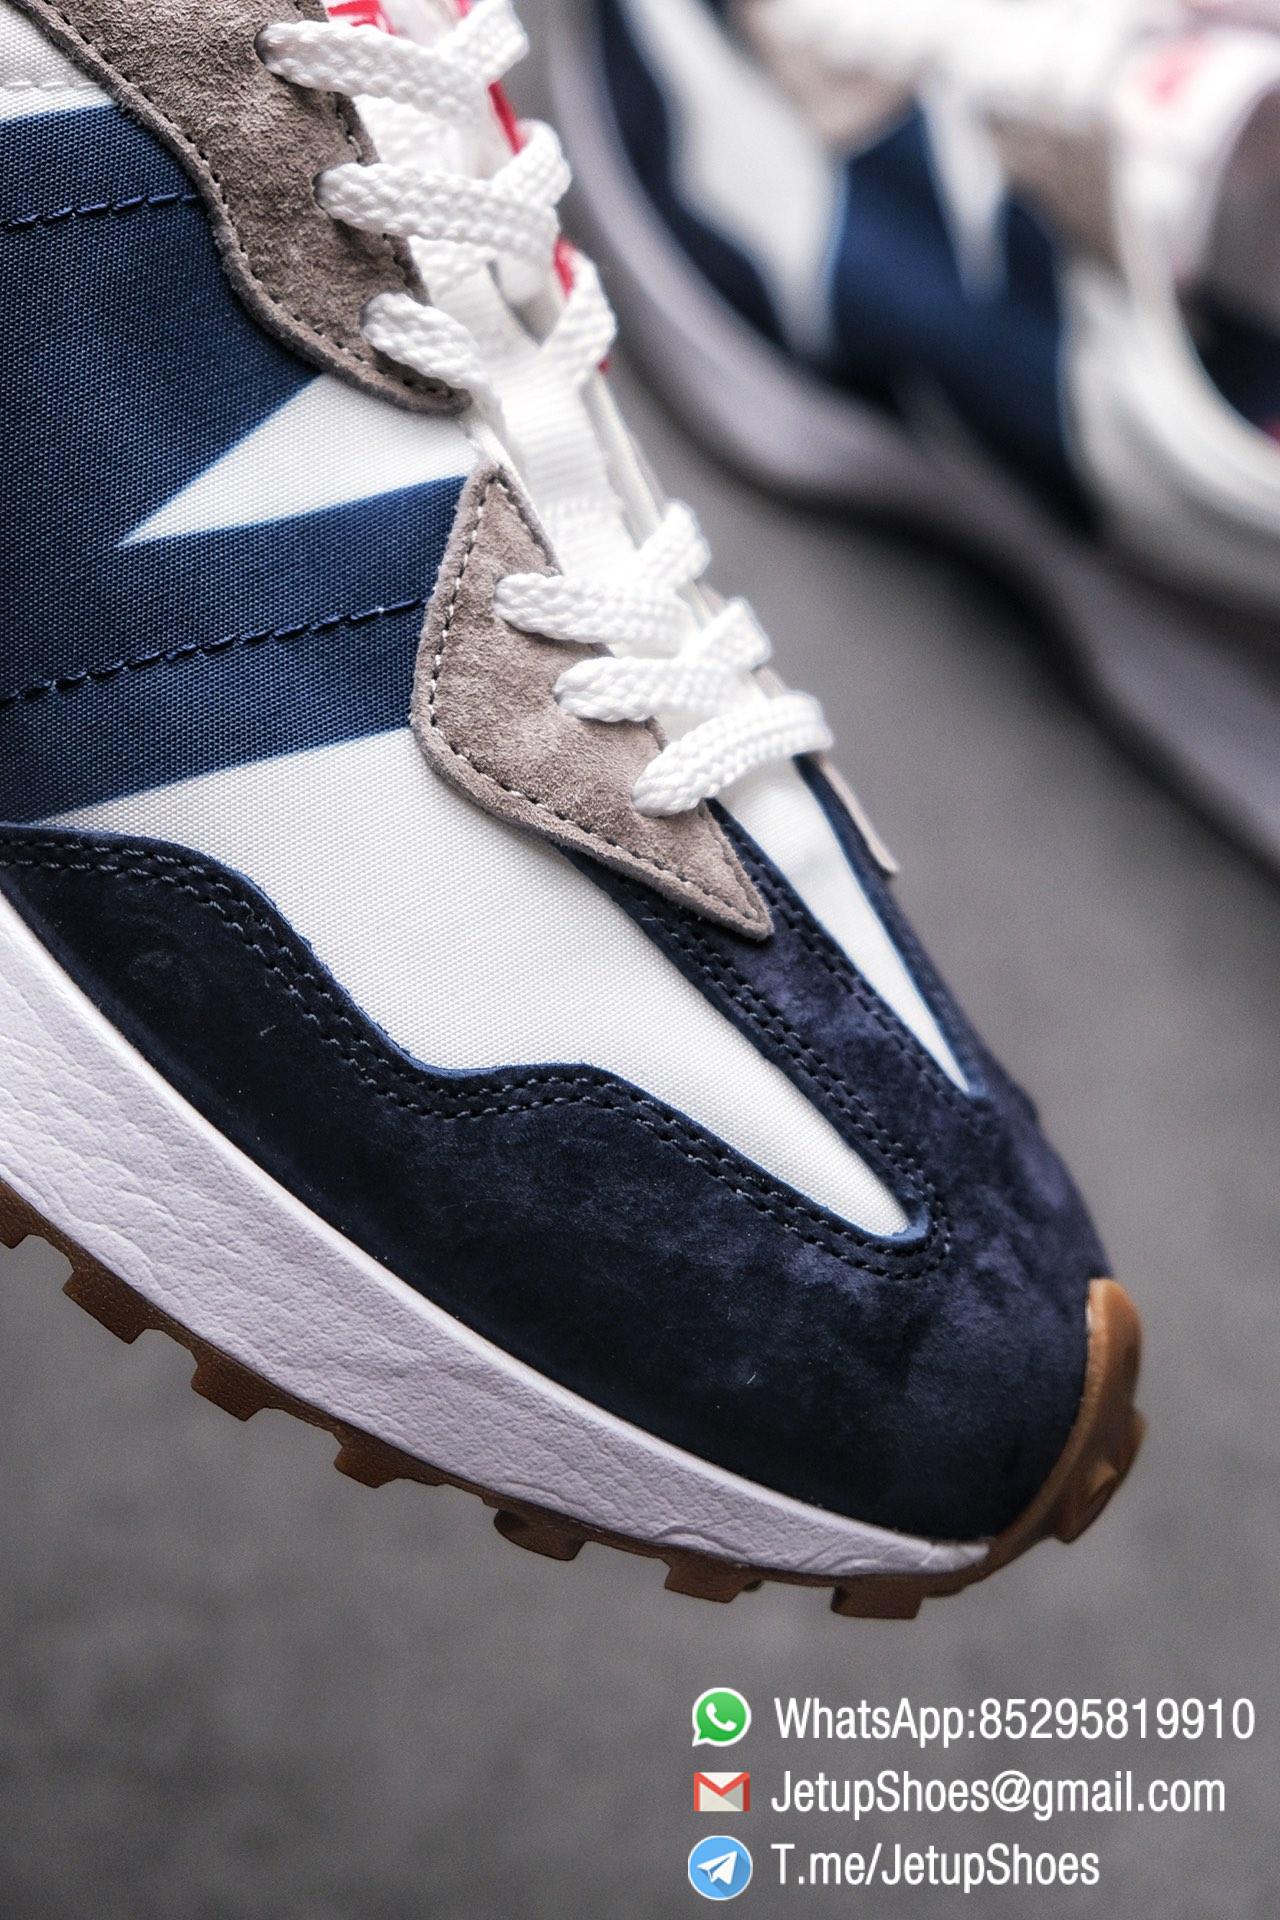 Best Replica New Balance 327 Navy White Gum Running Shoes SKU MS327WR Top Quality Snkrs 05